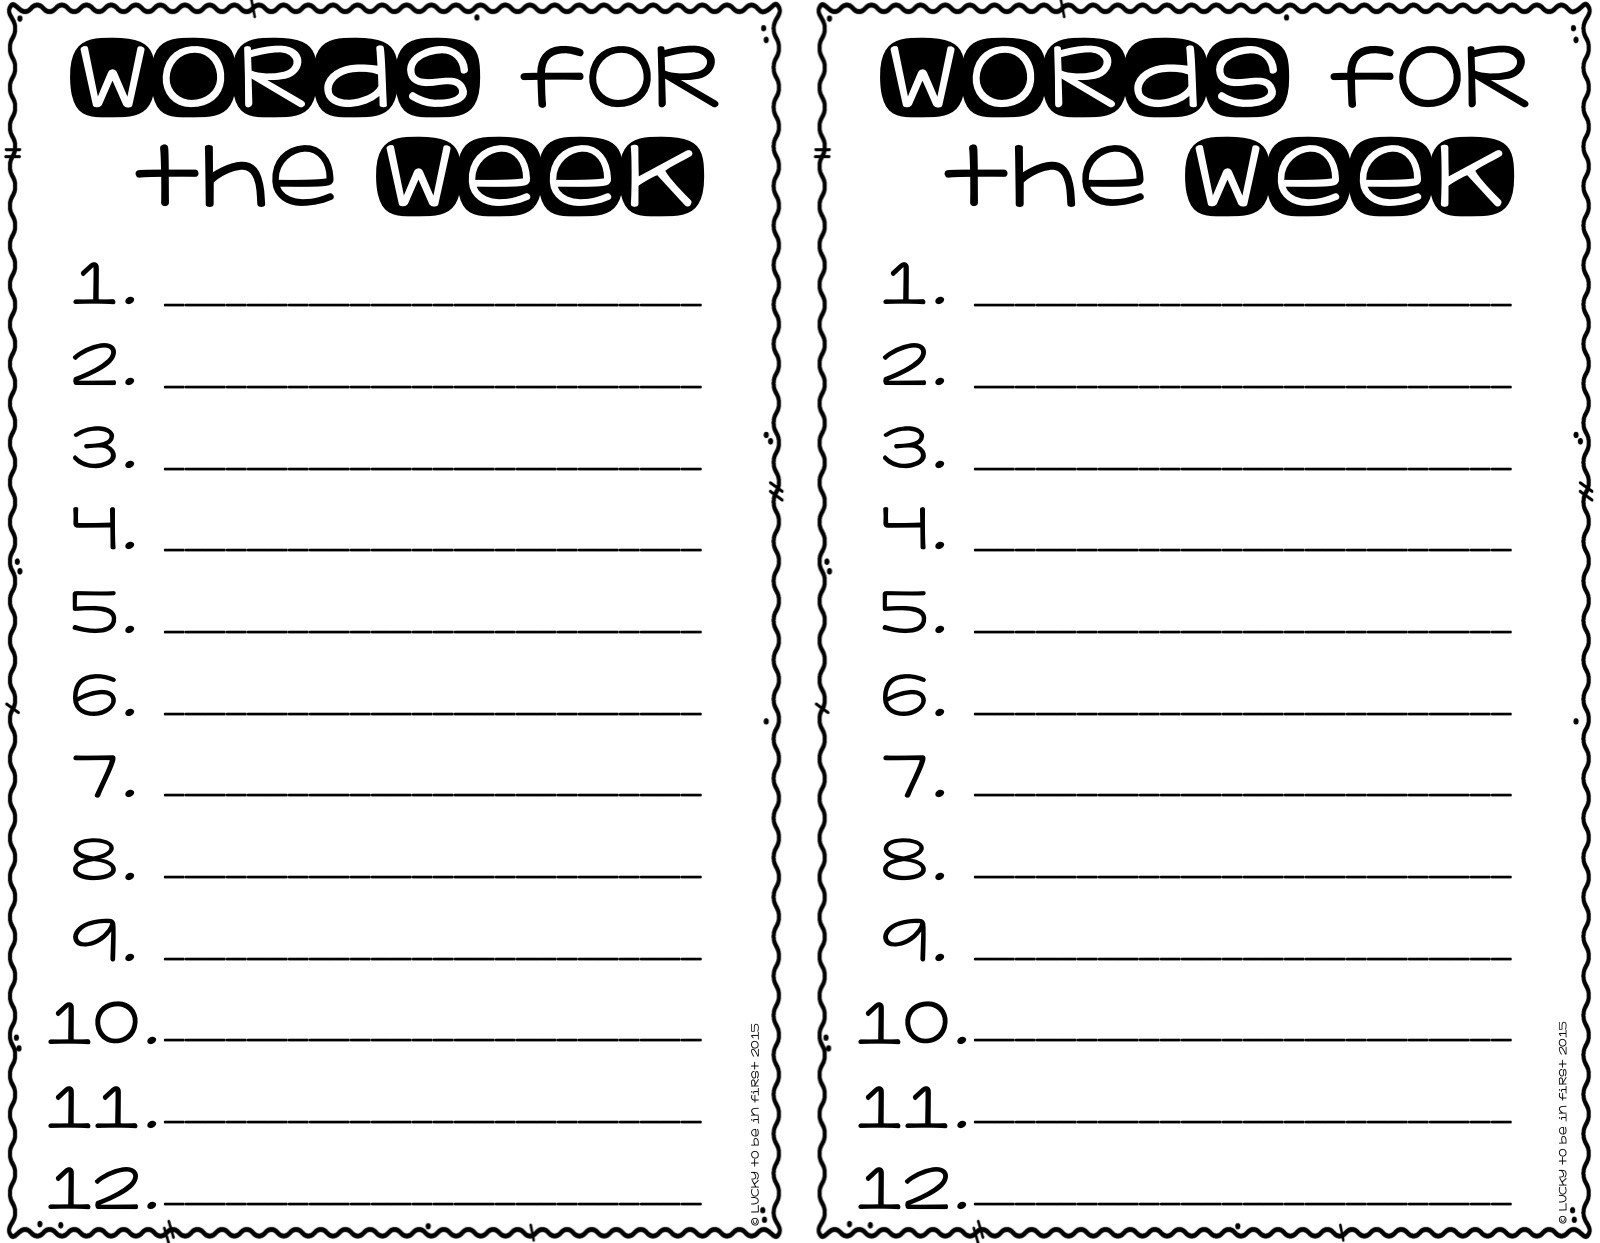 Words for the Week Daily 5 Word Work | Lucky Learning with Molly Lynch 